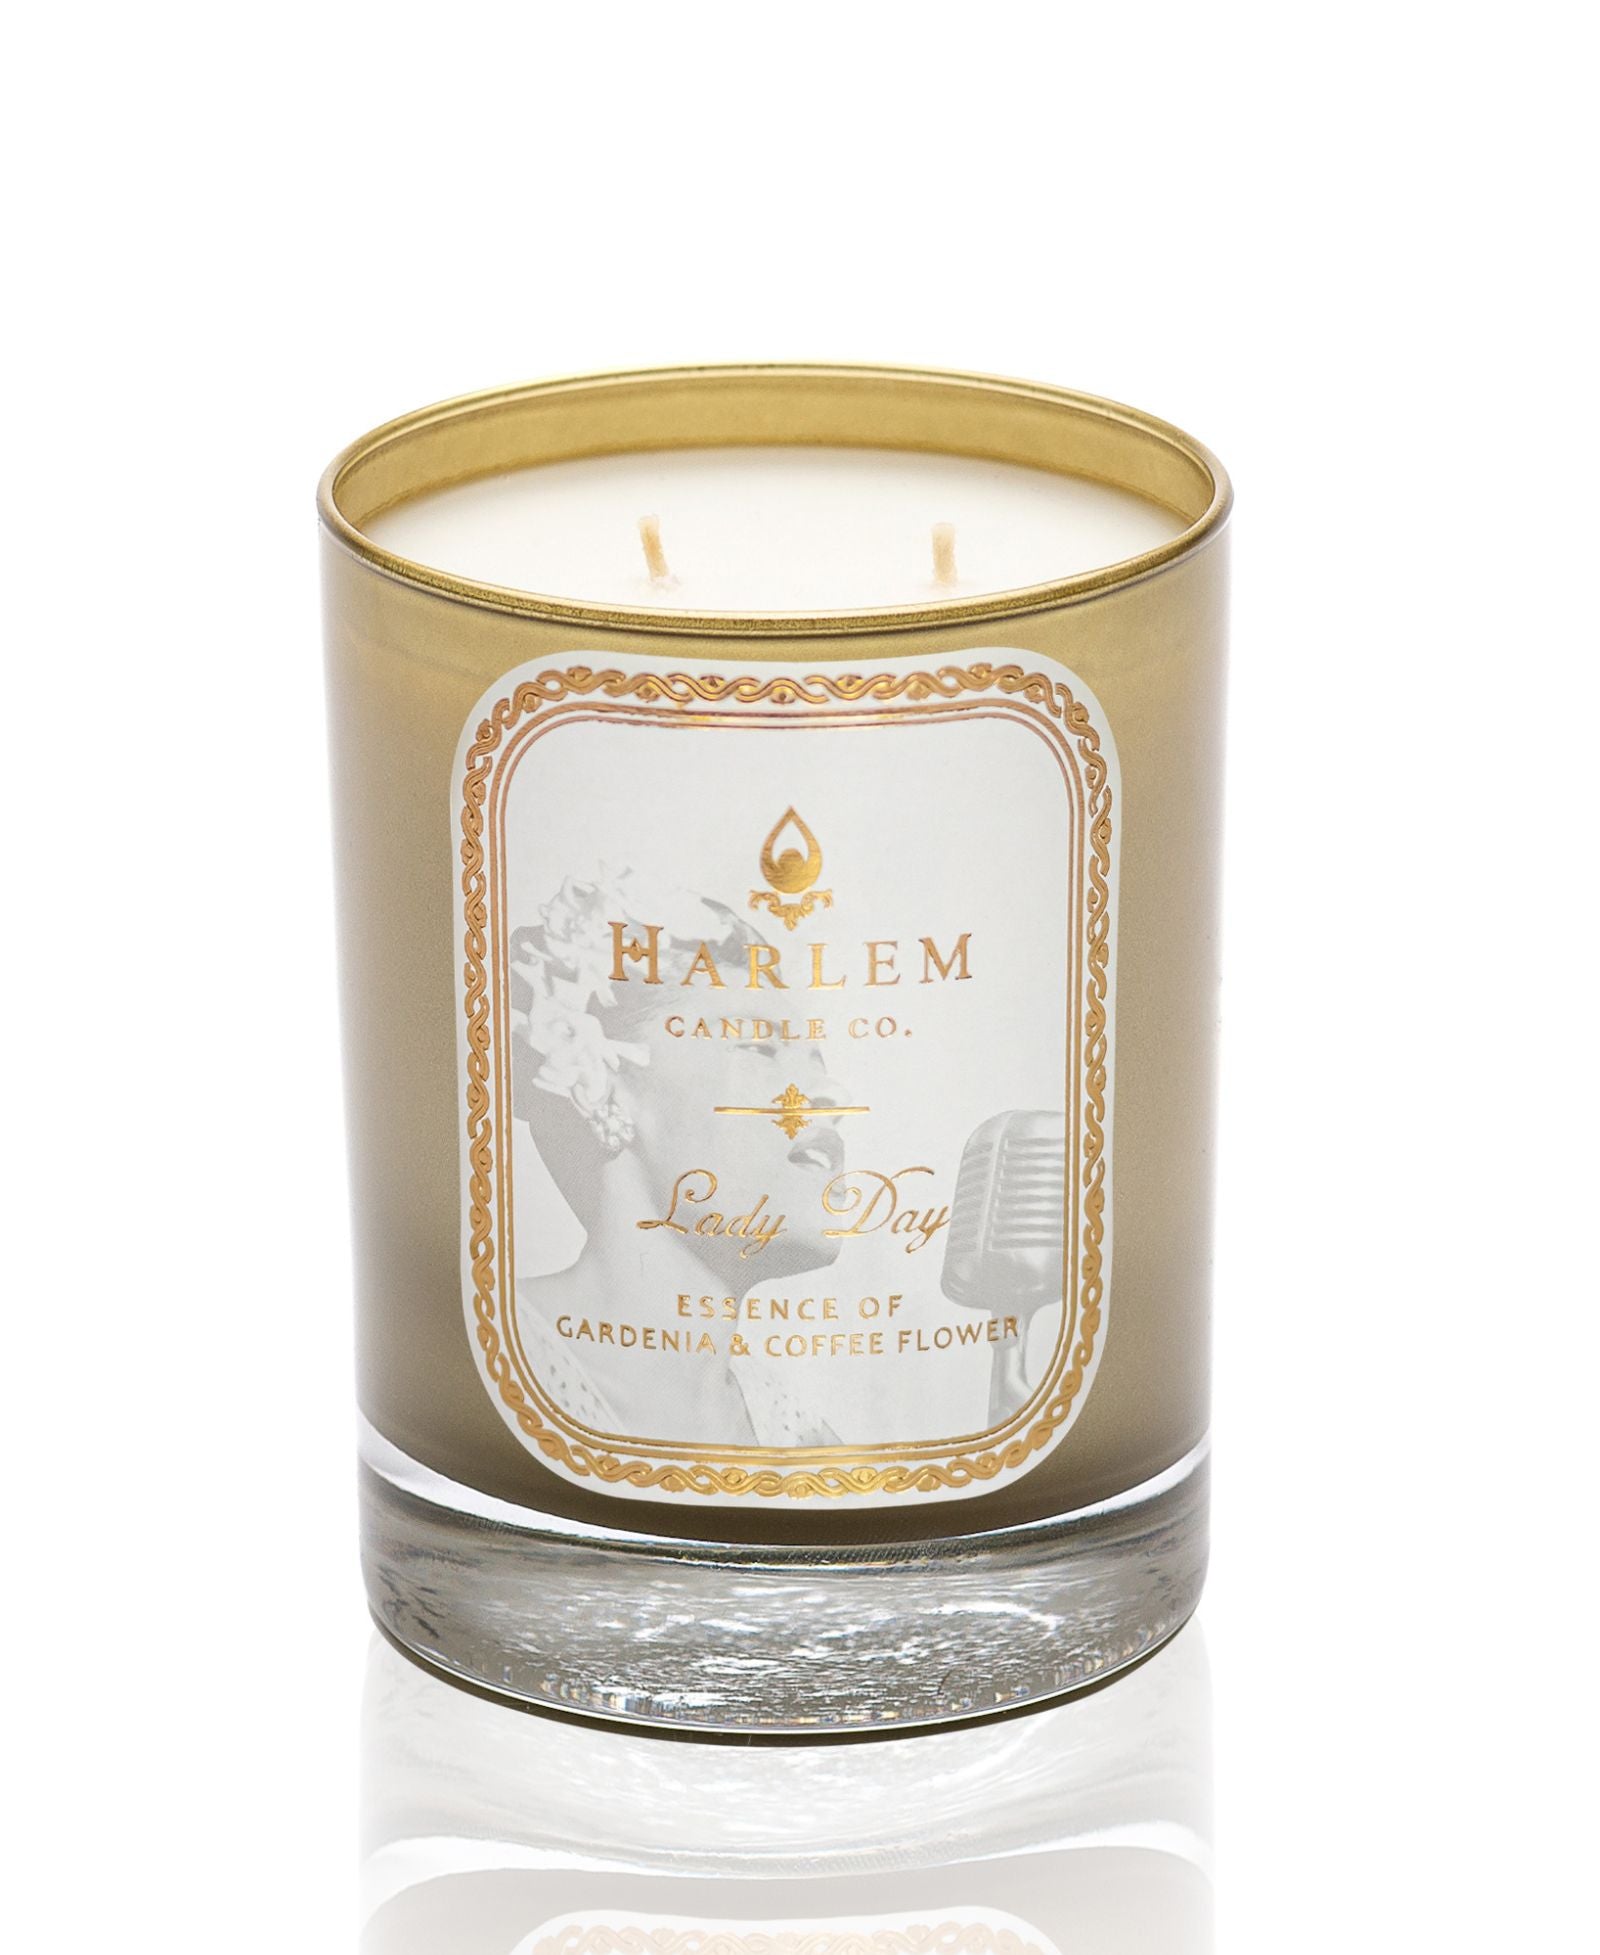 Image of Lady Day candle pictured on a White background